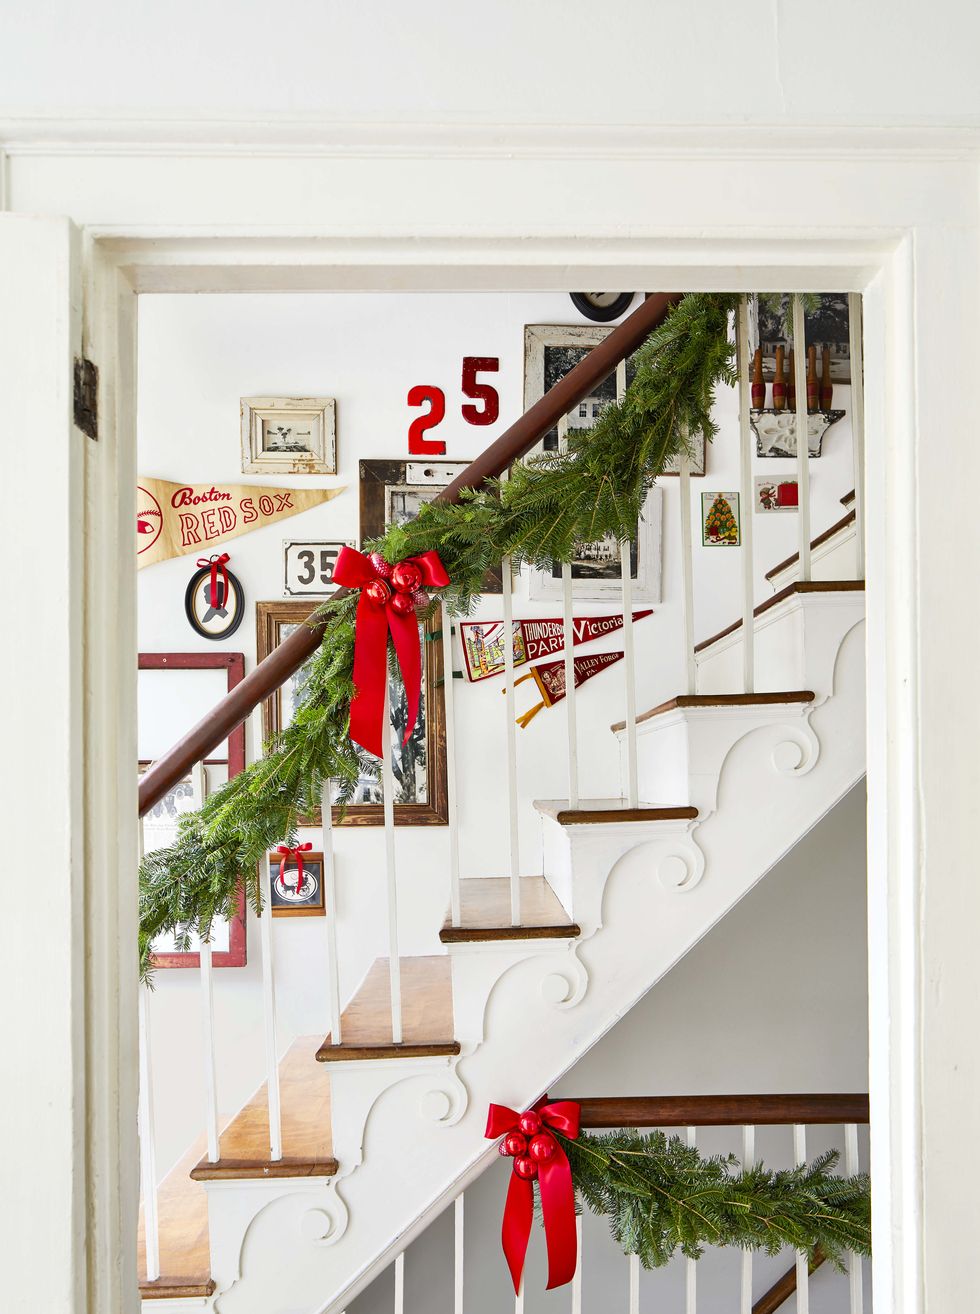 red bows with red christmas balls in the middle decorate a staircase with greenery